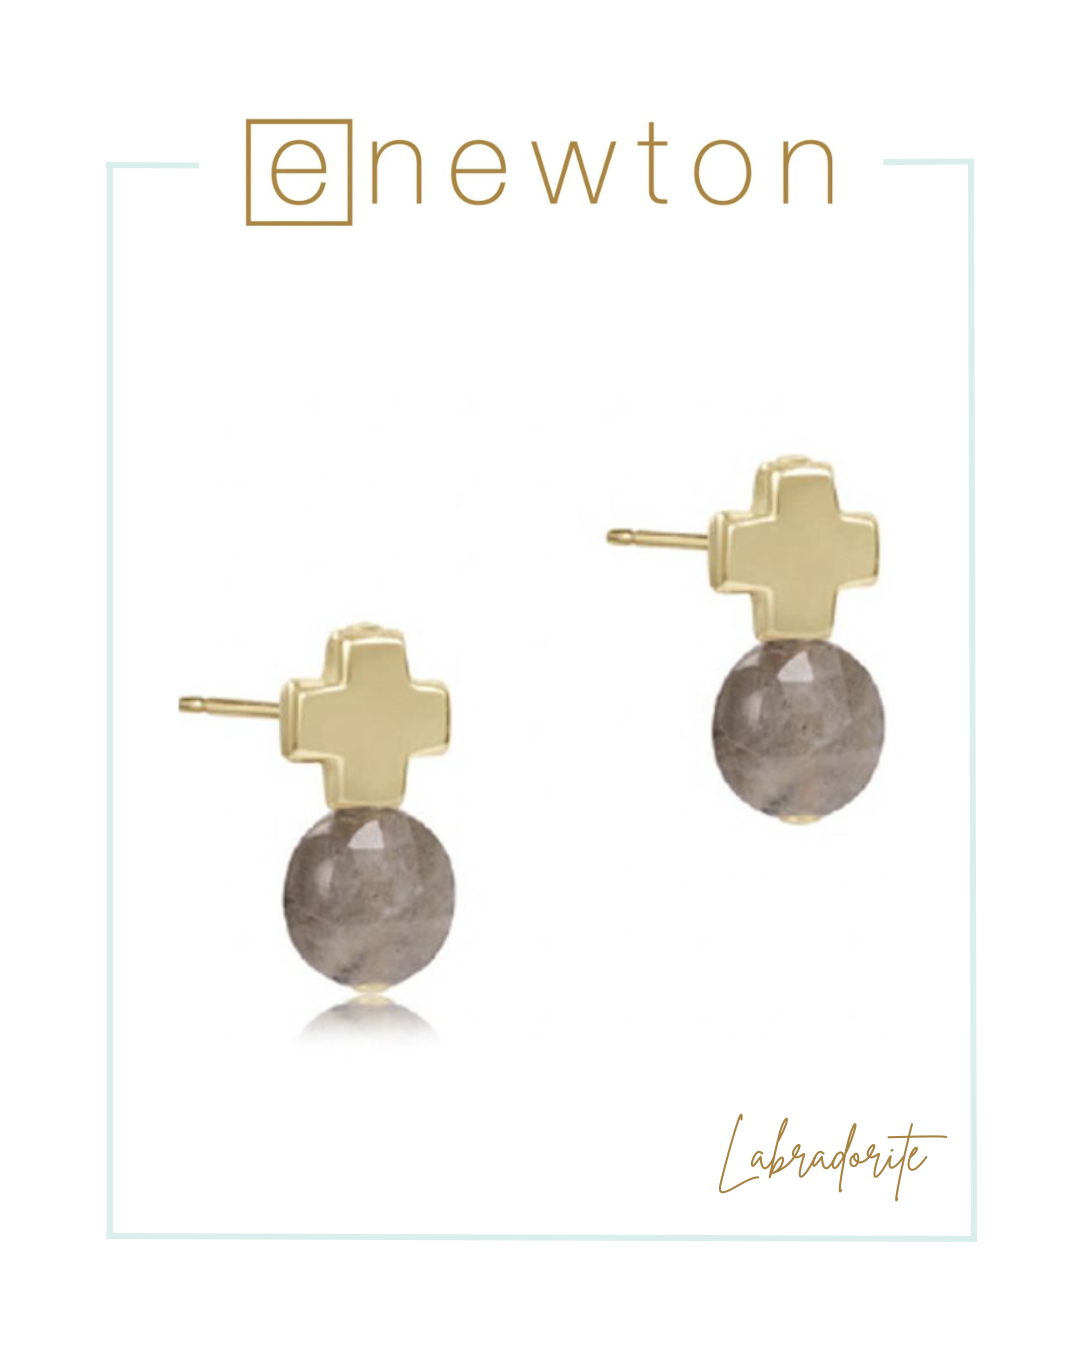 E Newton Signature Cross Gold Stud - Spring/Summer Gemstones-Earrings-ENEWTON-The Village Shoppe, Women’s Fashion Boutique, Shop Online and In Store - Located in Muscle Shoals, AL.